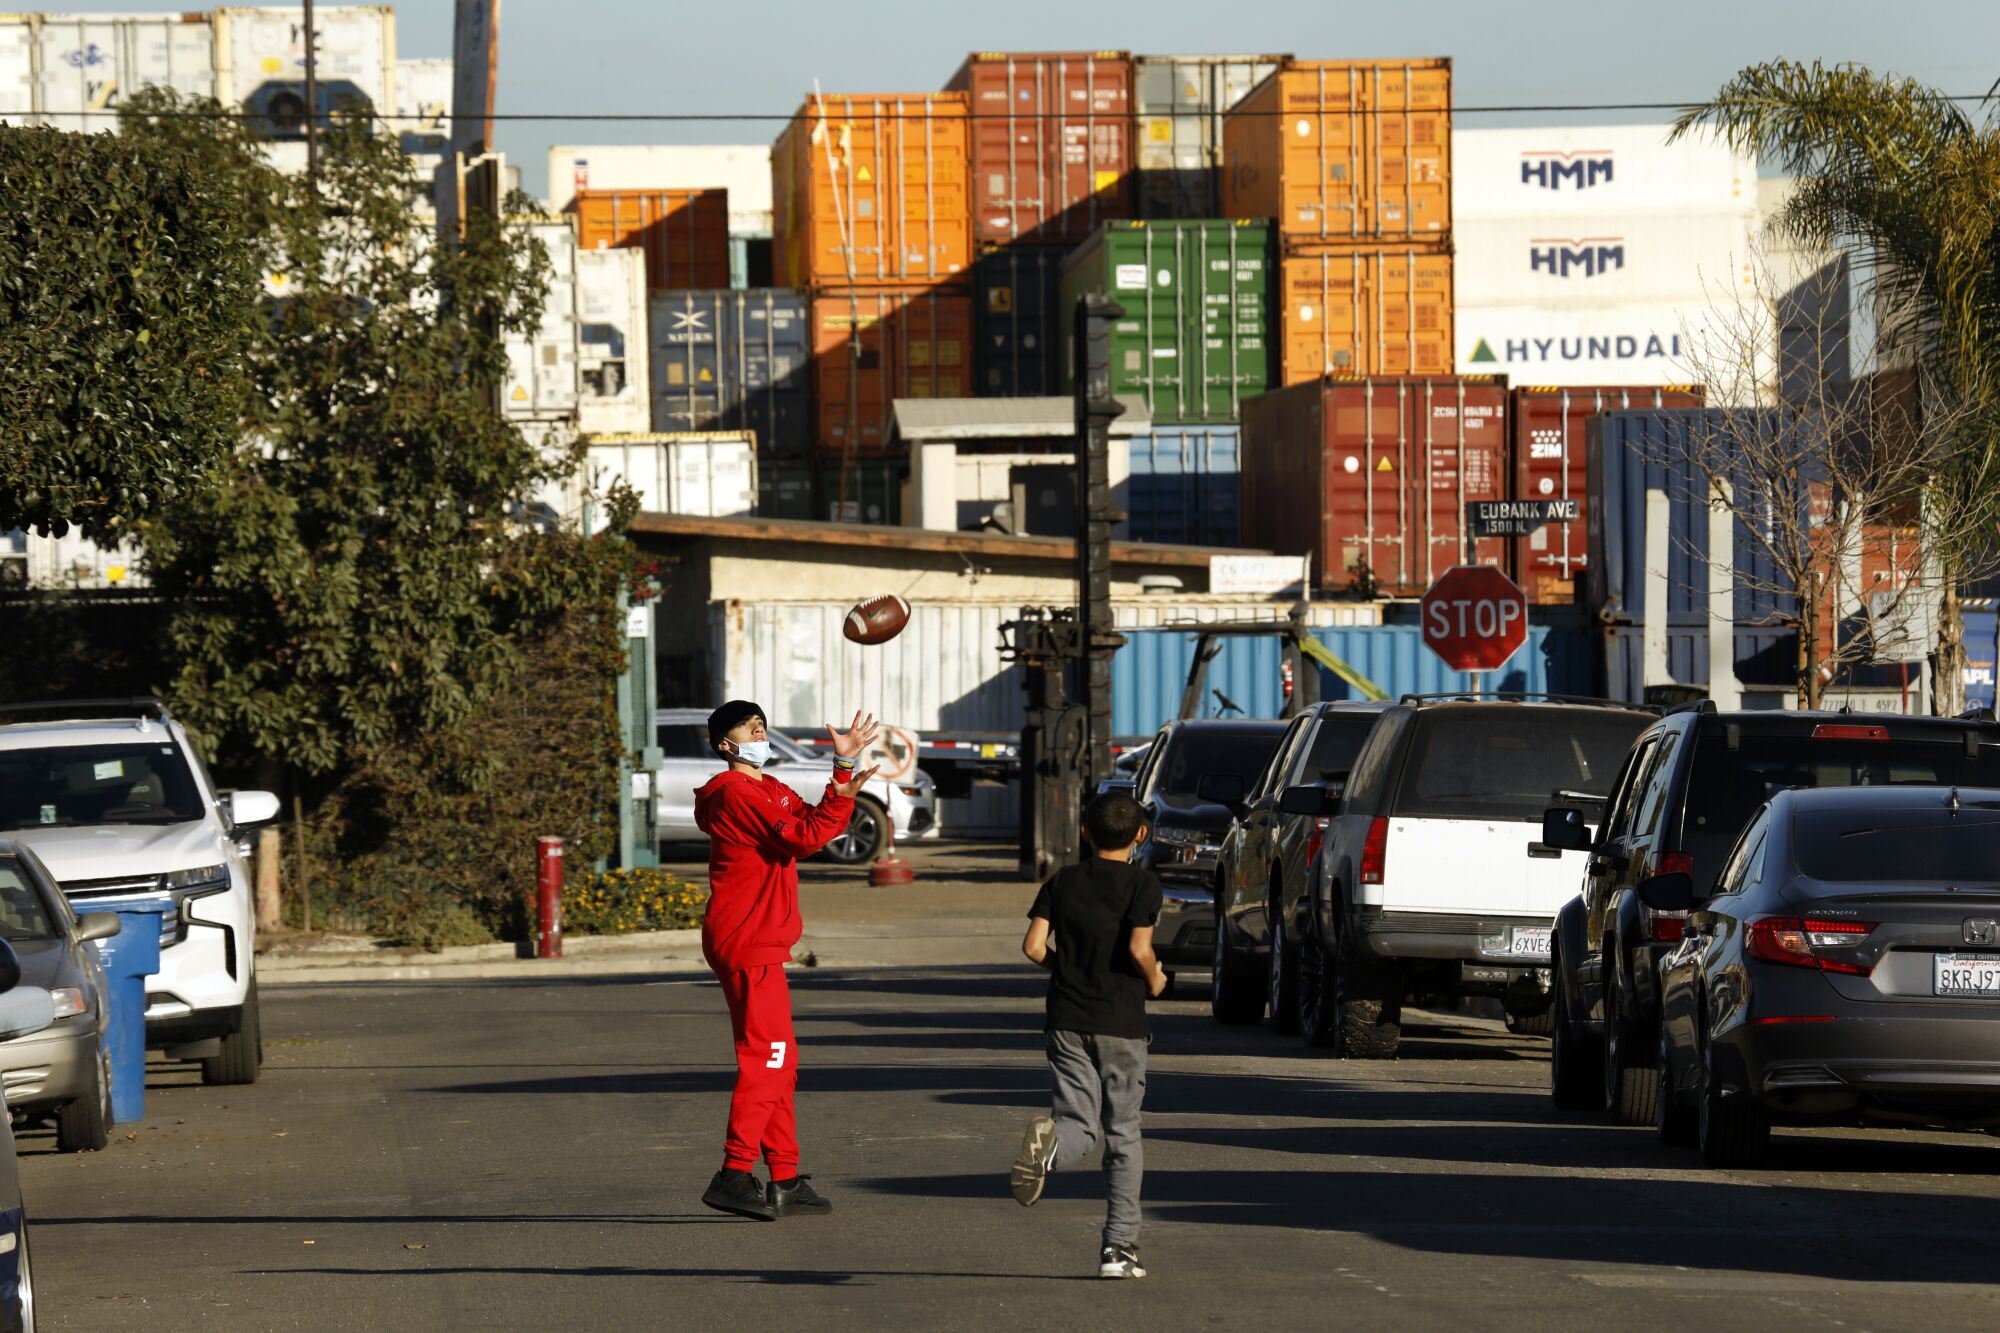 Containers are piled high in a lot off of Lomita Boulevard.